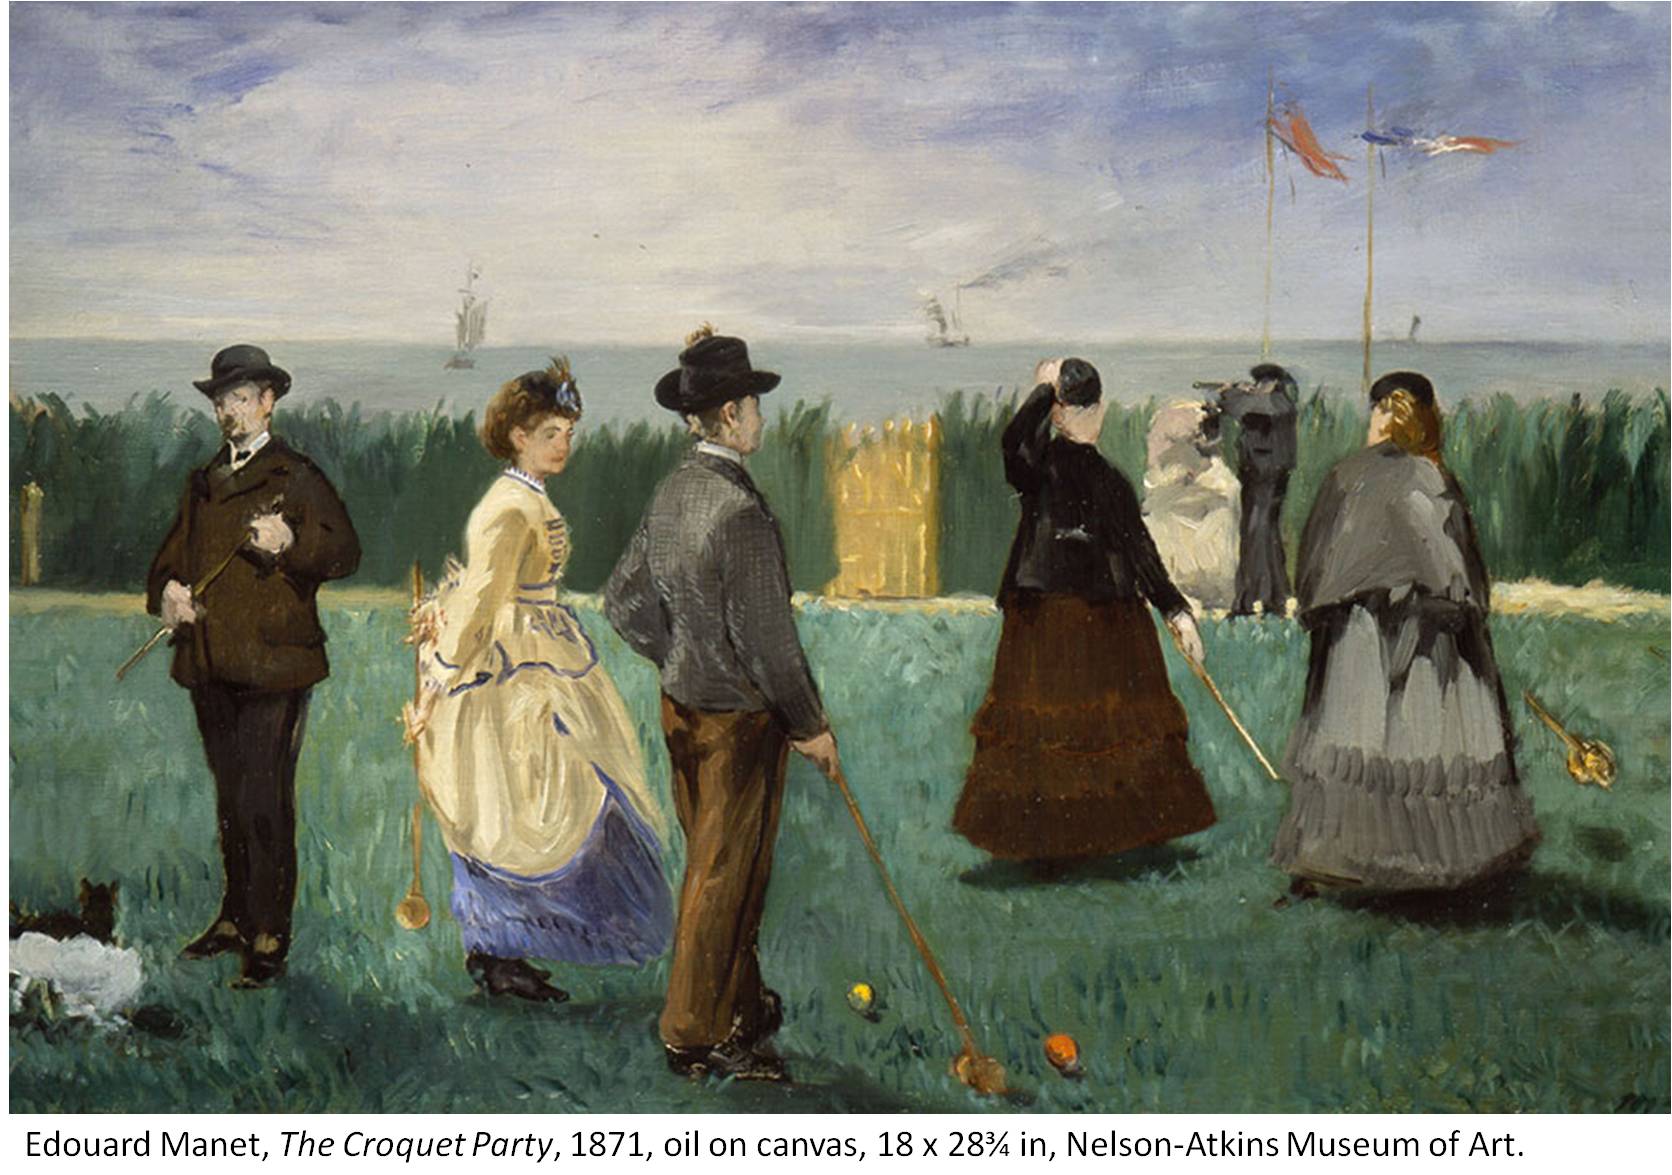 Edouard Manet, The Croquet Party, 1871, oil on canvas, 18 x 28¾ in, Nelson-Atkins Museum of Art.